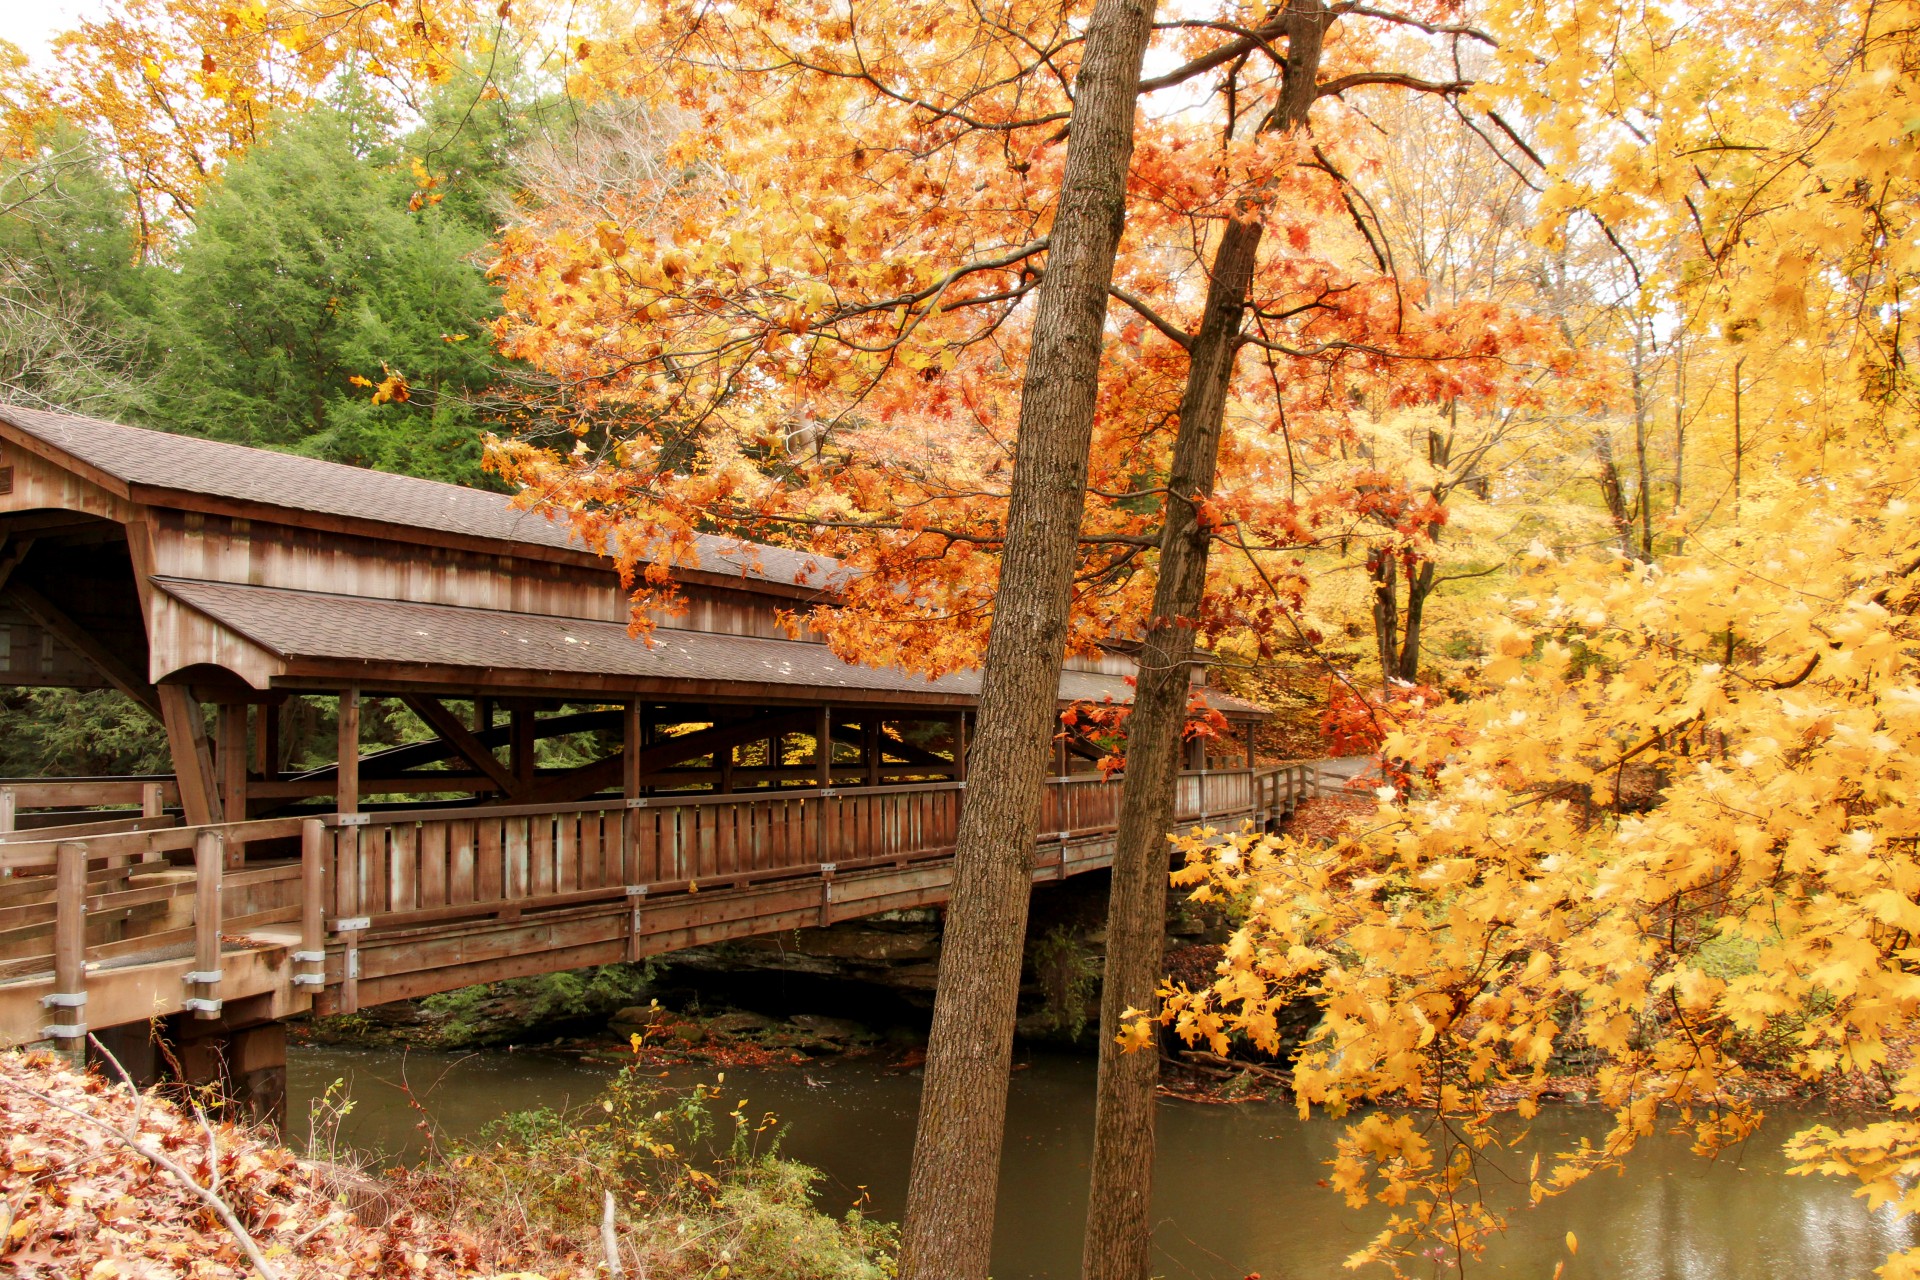 Covered Bridge With Autumn Leaves